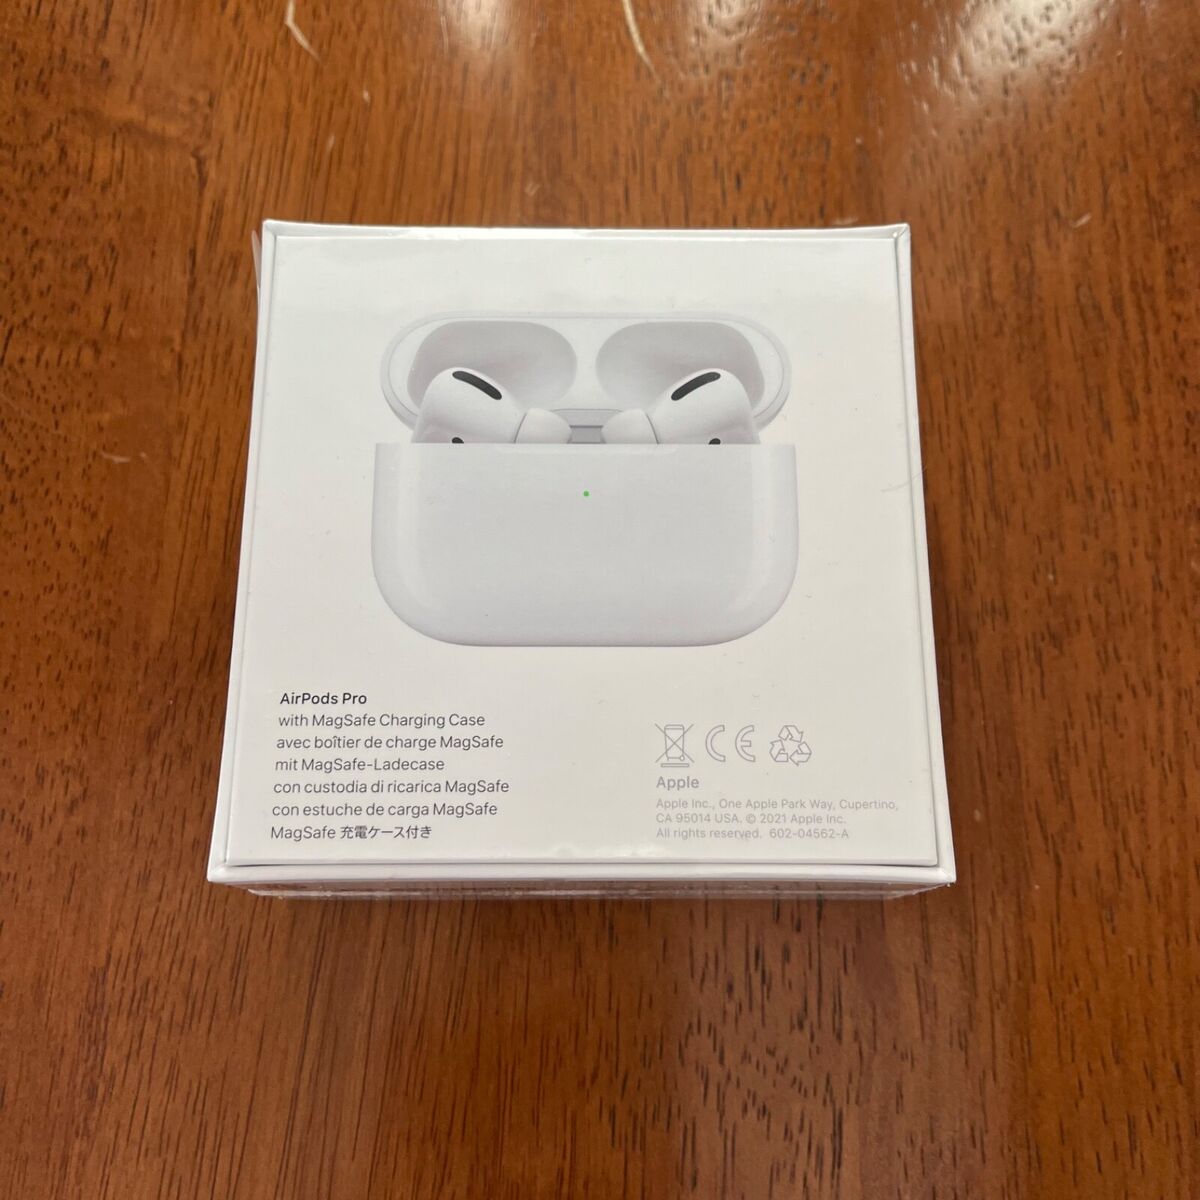 Apple AirPods Pro with MagSafe Charging Case - BRAND NEW in Sealed Box!